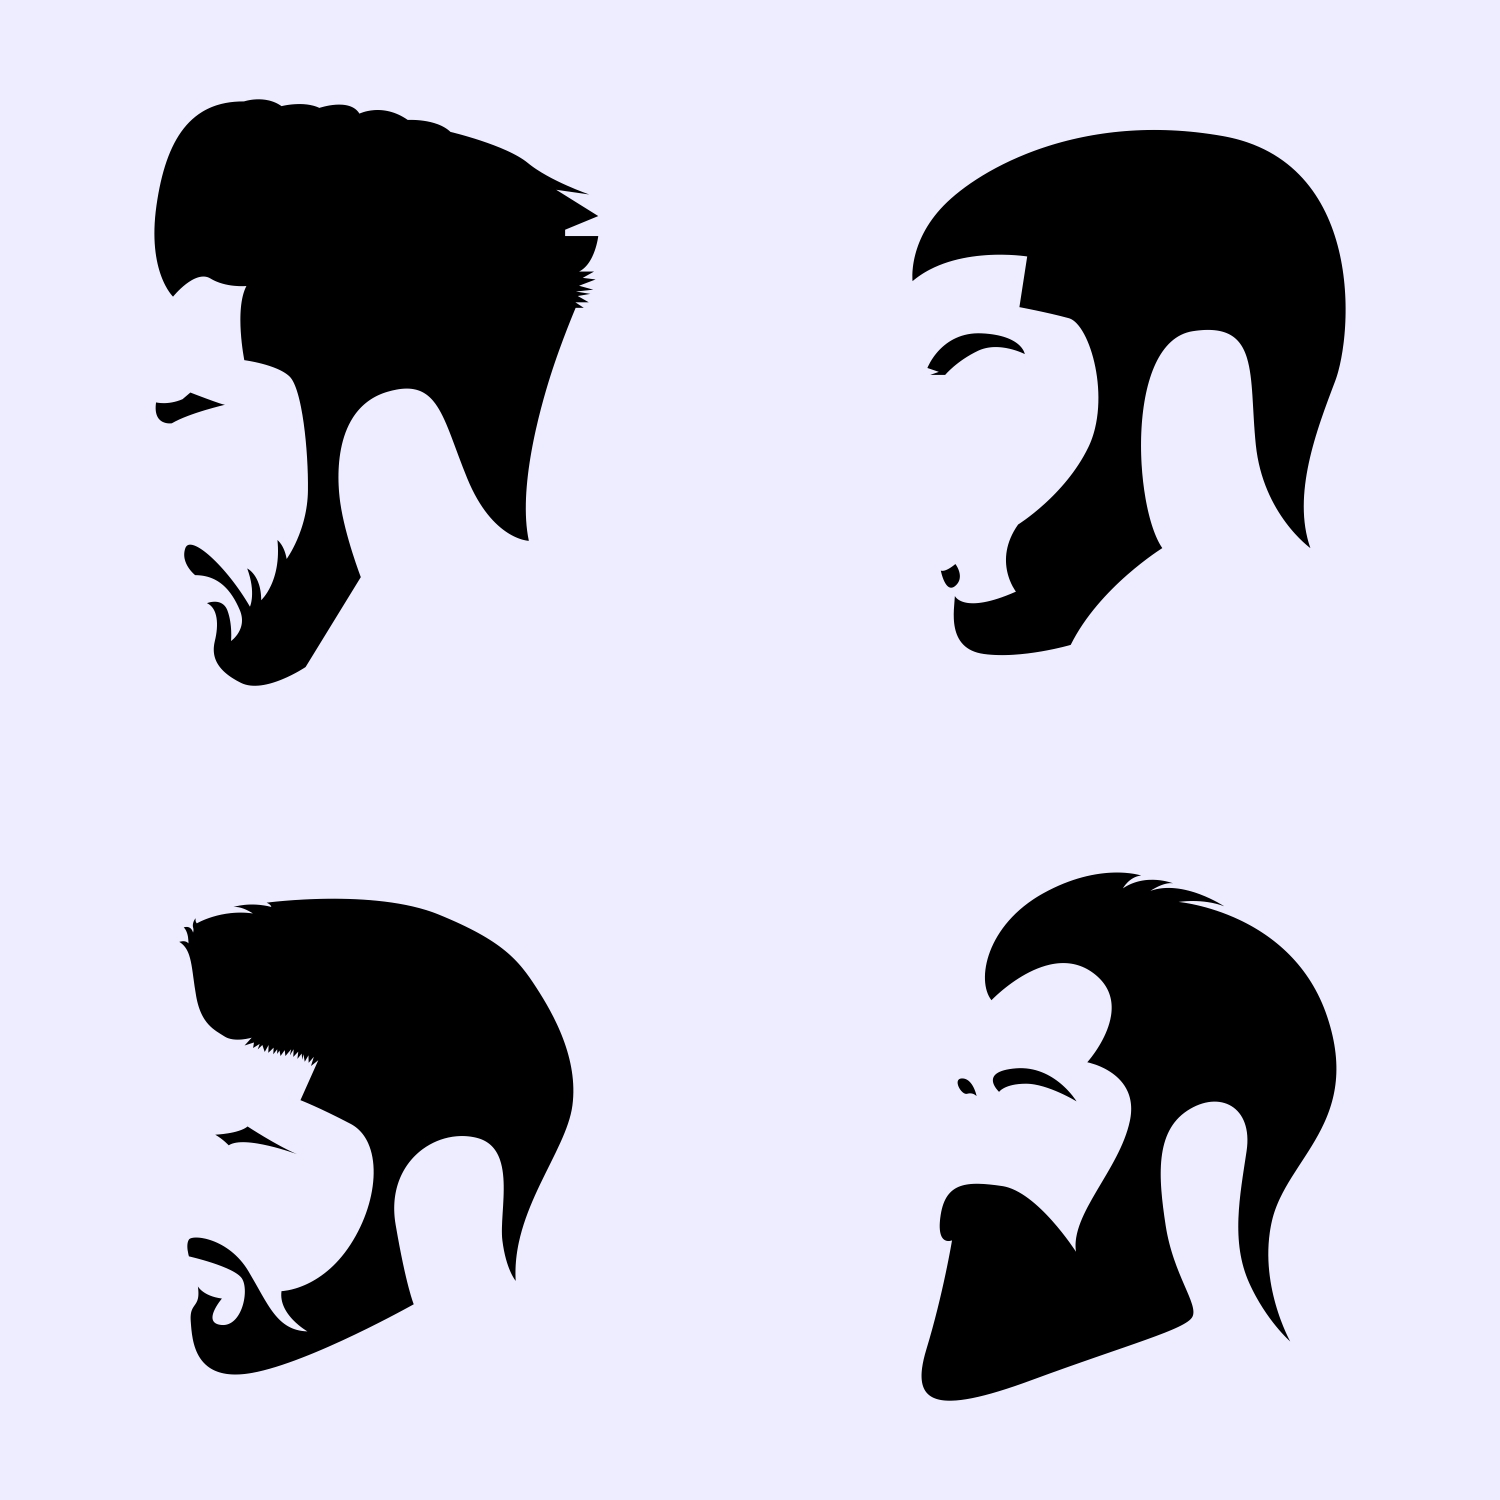 Free vector beard and hairstyle set designs CDR file download for free